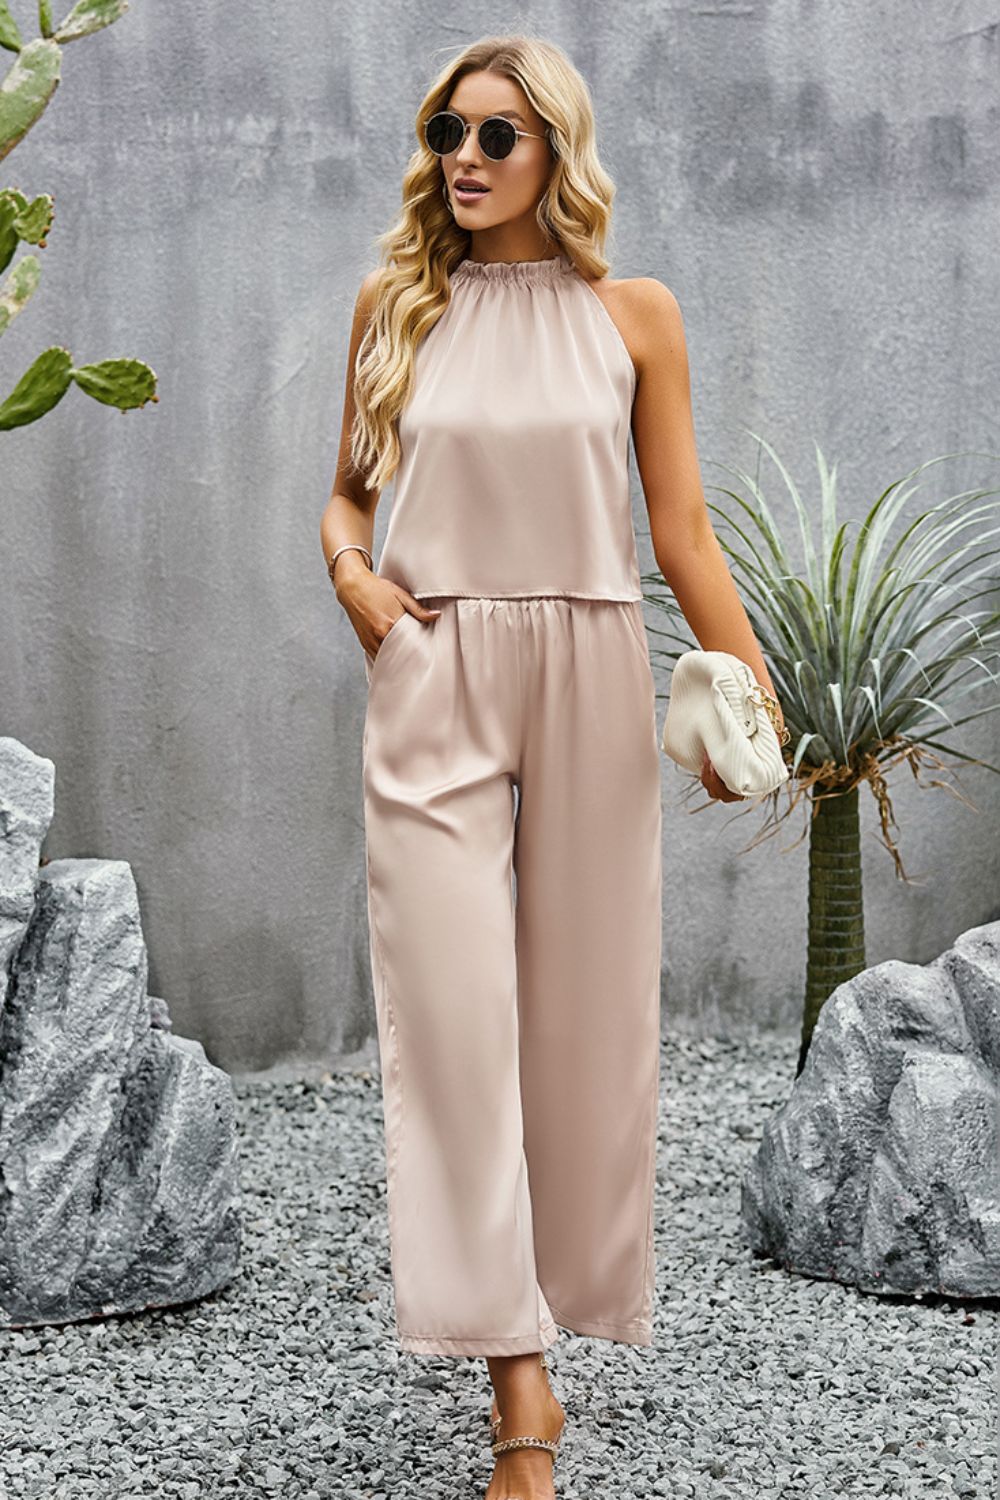 Grecian Neck Sleeveless Pocketed Top and Pants Set - Cheeky Chic Boutique